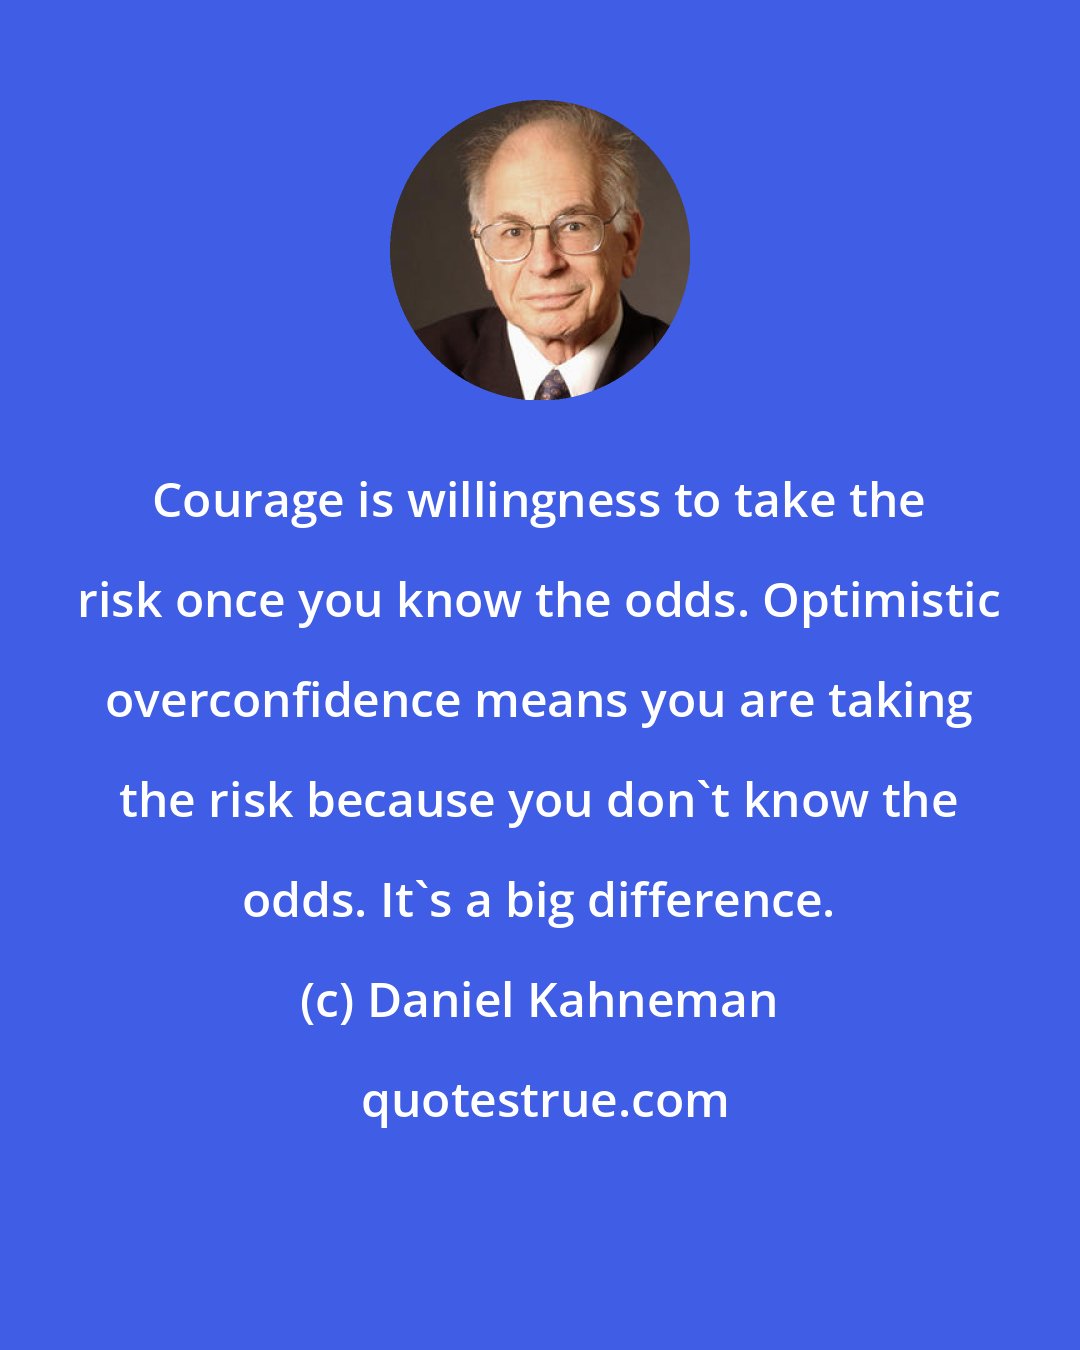 Daniel Kahneman: Courage is willingness to take the risk once you know the odds. Optimistic overconfidence means you are taking the risk because you don't know the odds. It's a big difference.